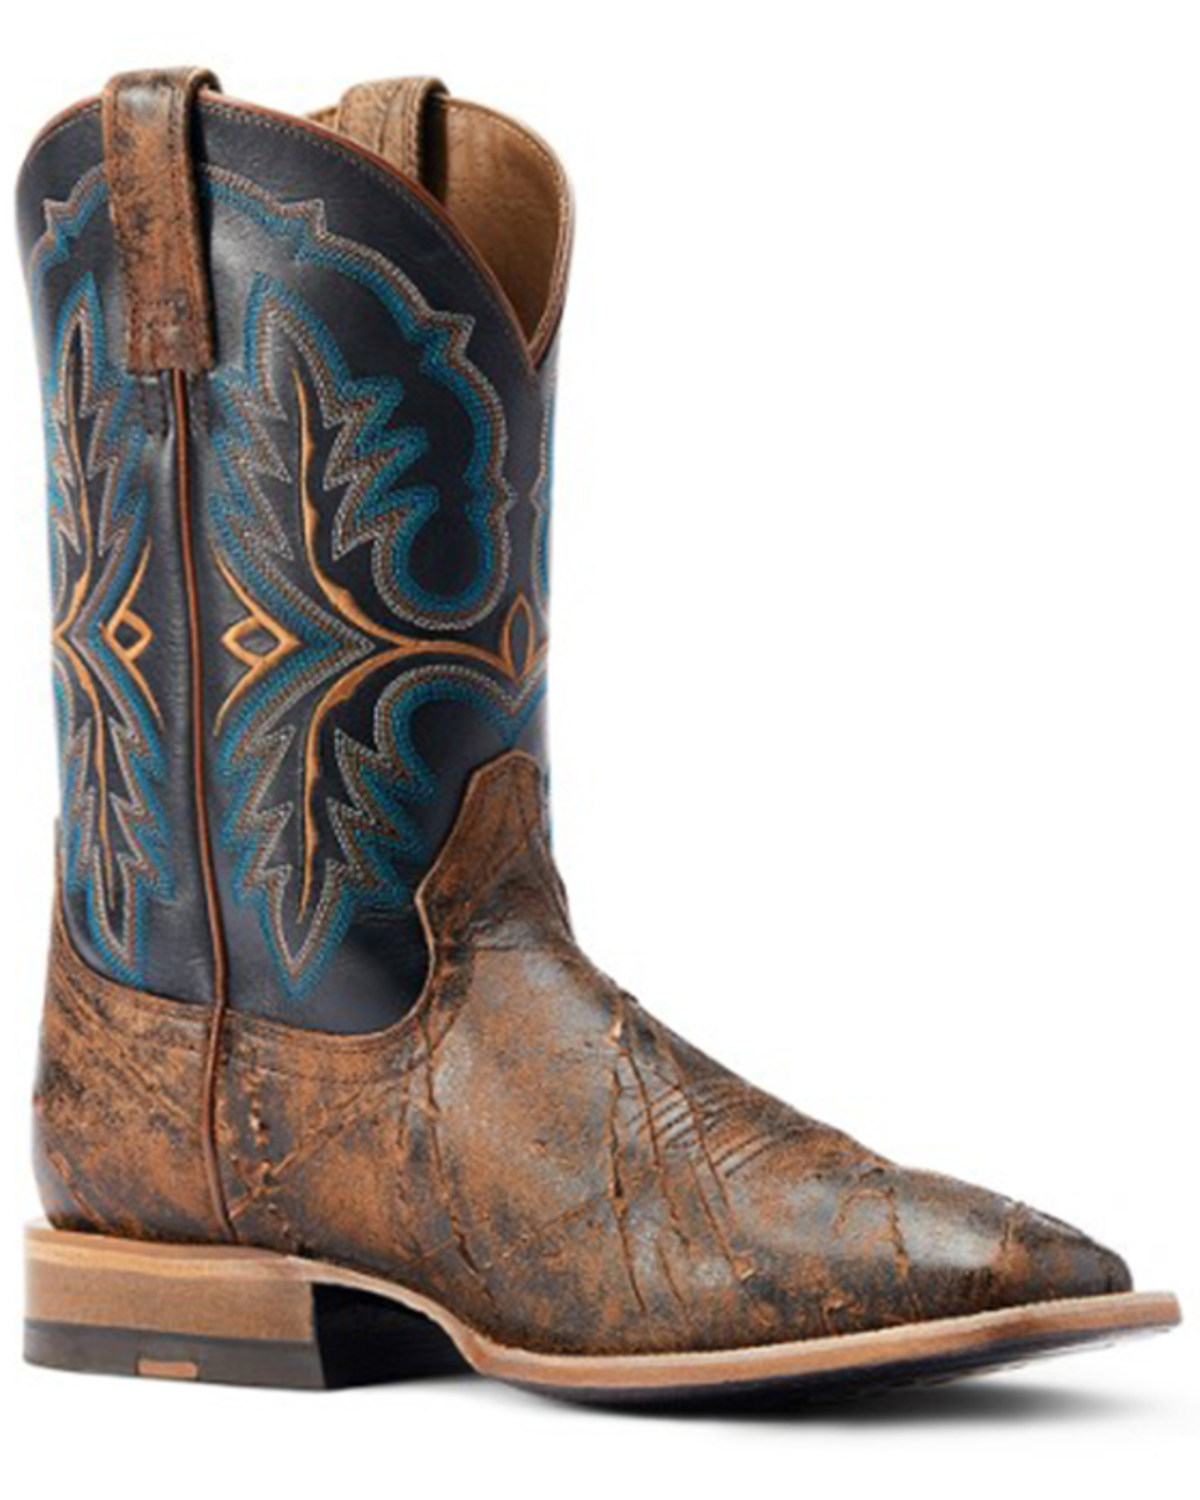 Ariat Men's Carlsbad Adobe Western Boots - Broad Square Toe